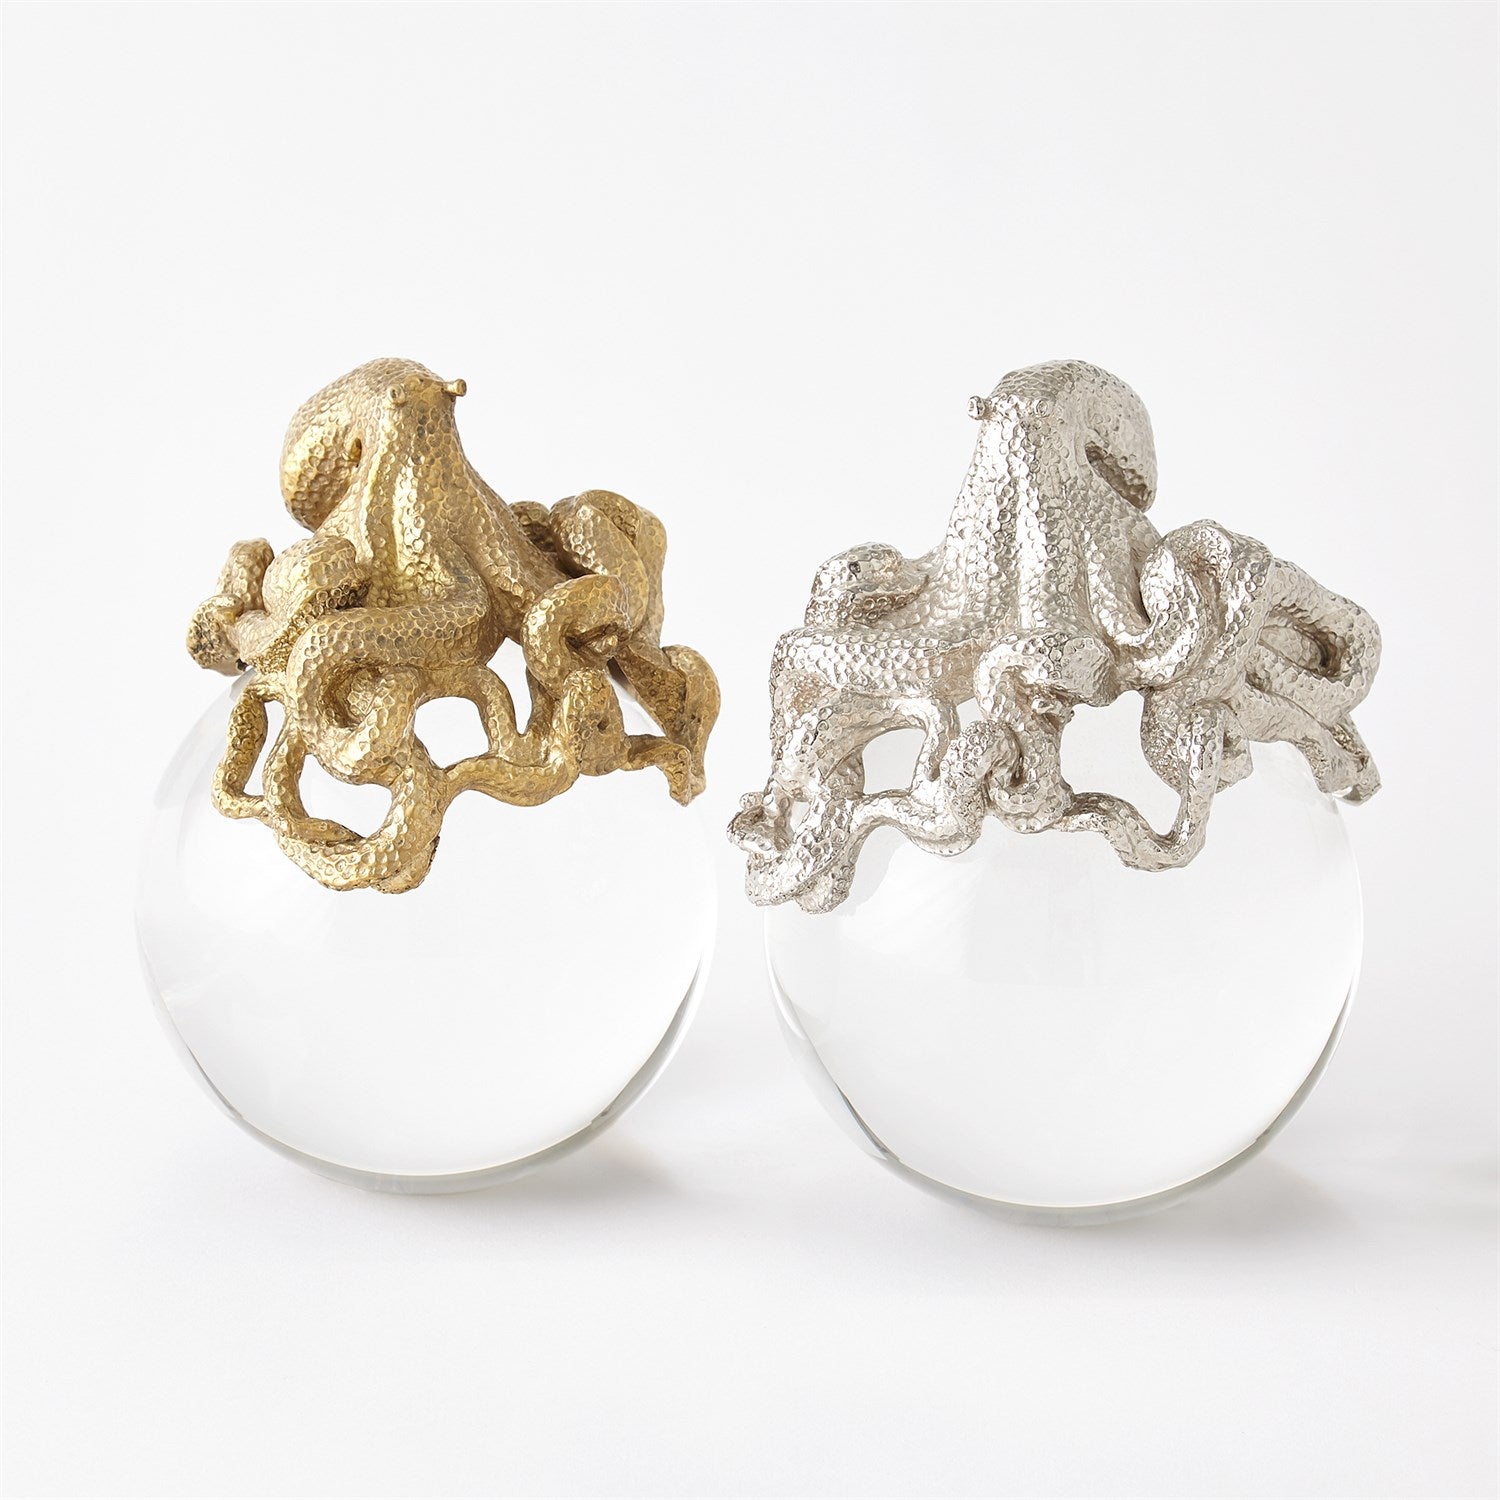 Octopus on Orb-Global Views-Sculptures & Objects-Artistic Elements